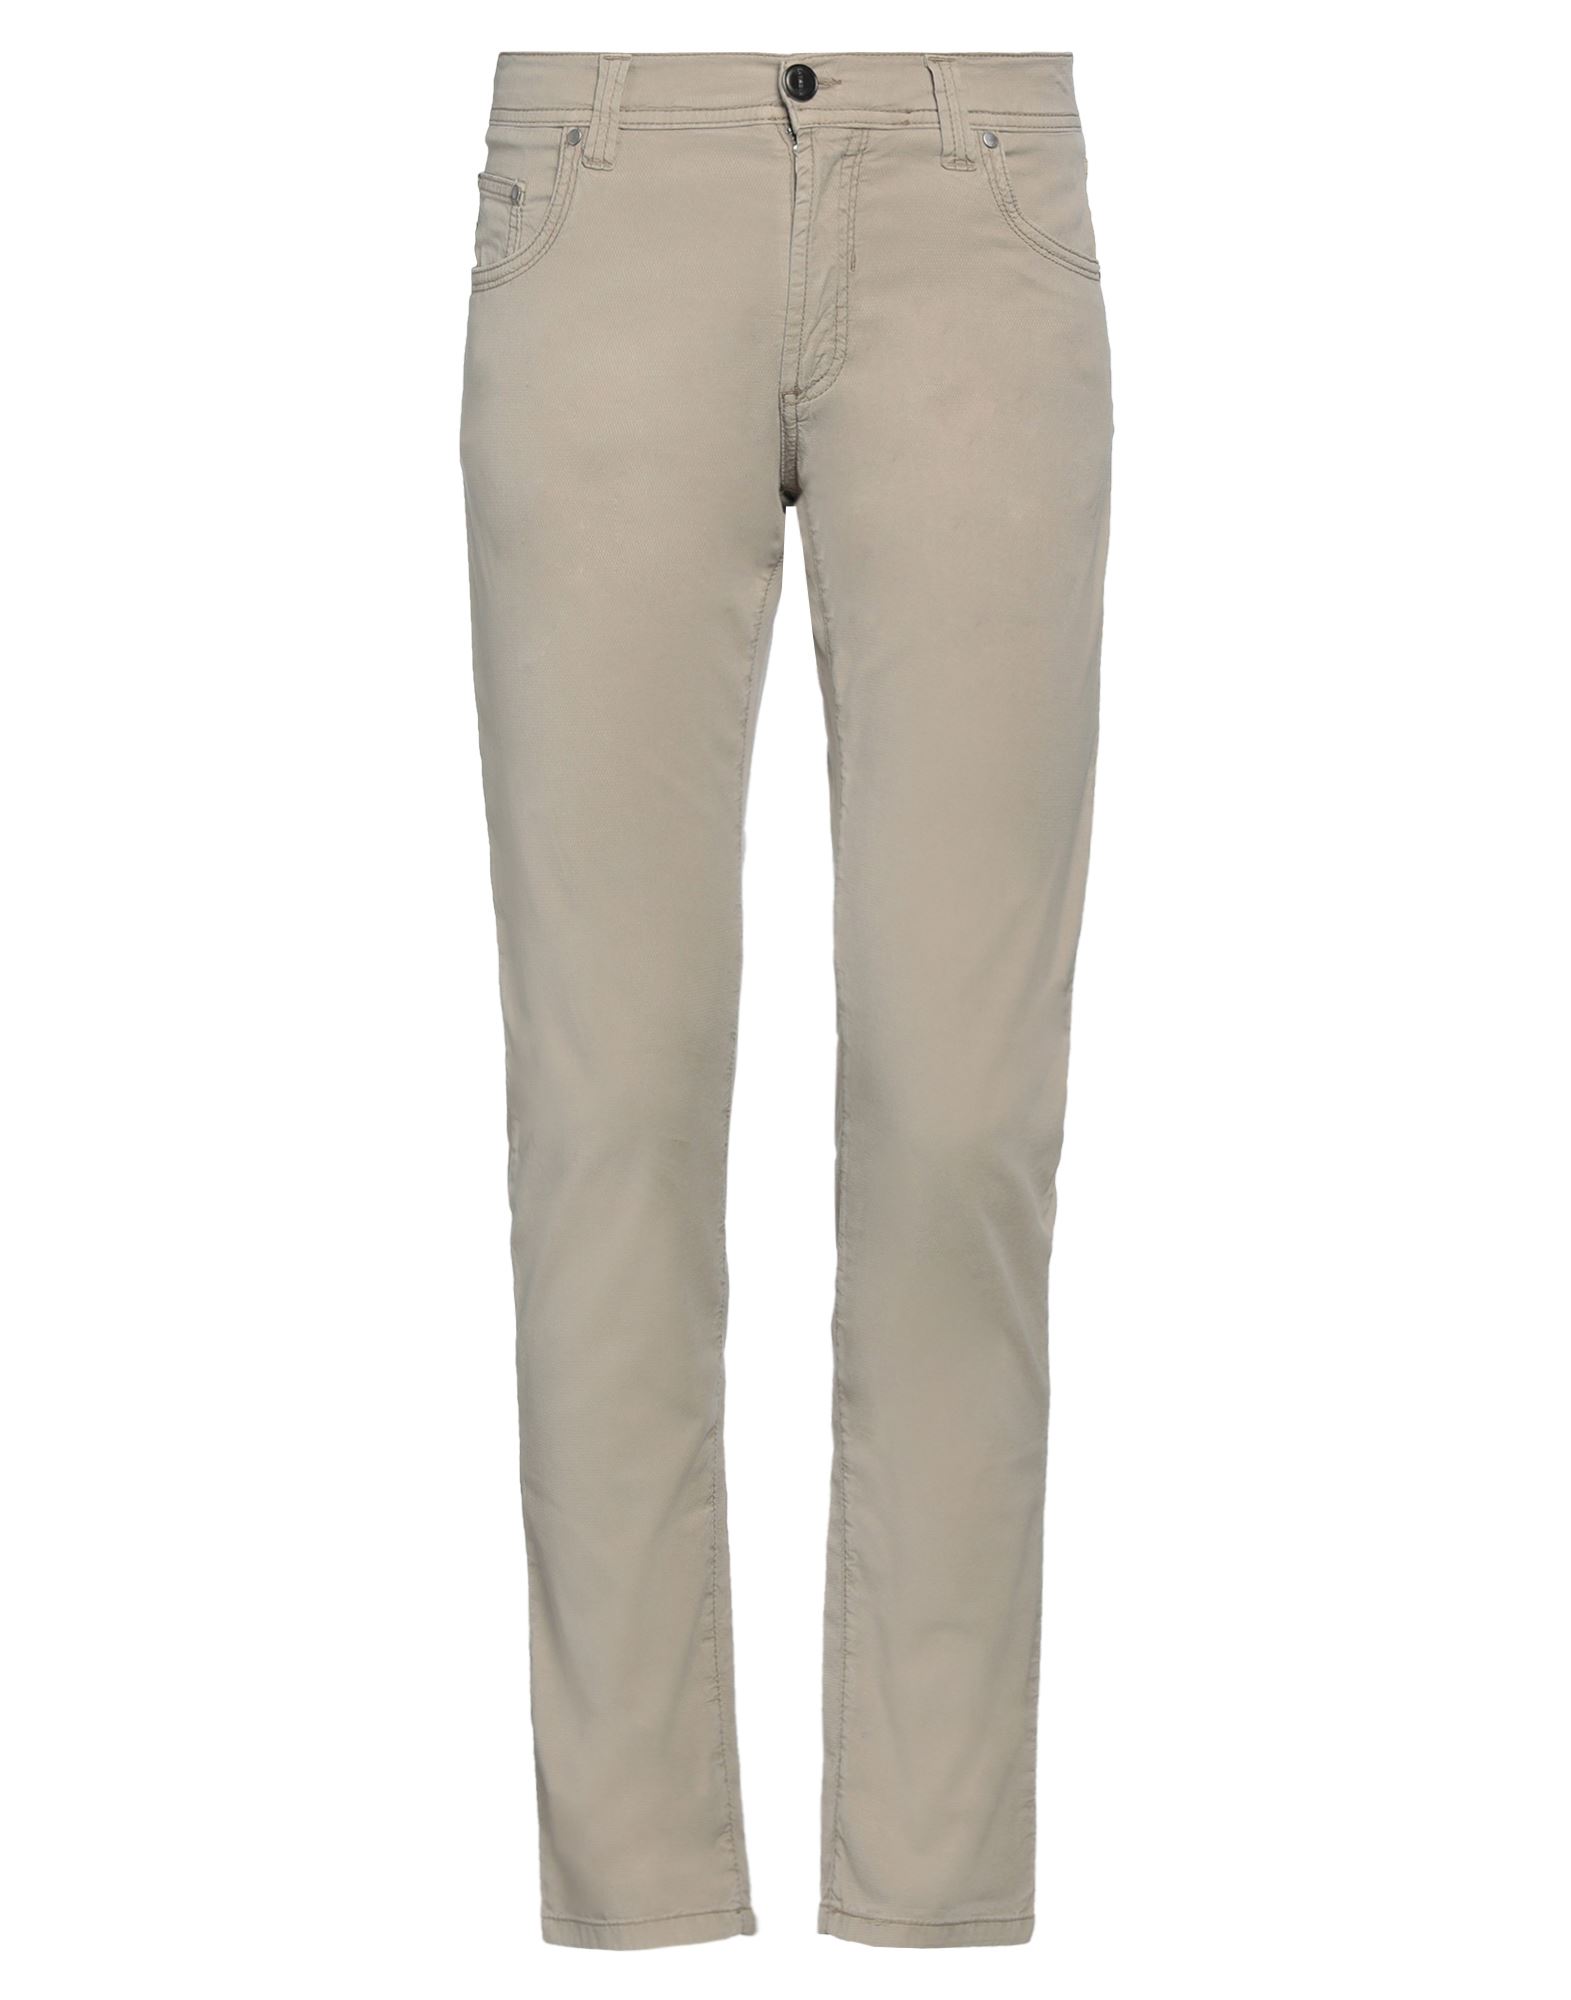 Nicwave Pants In Neutrals